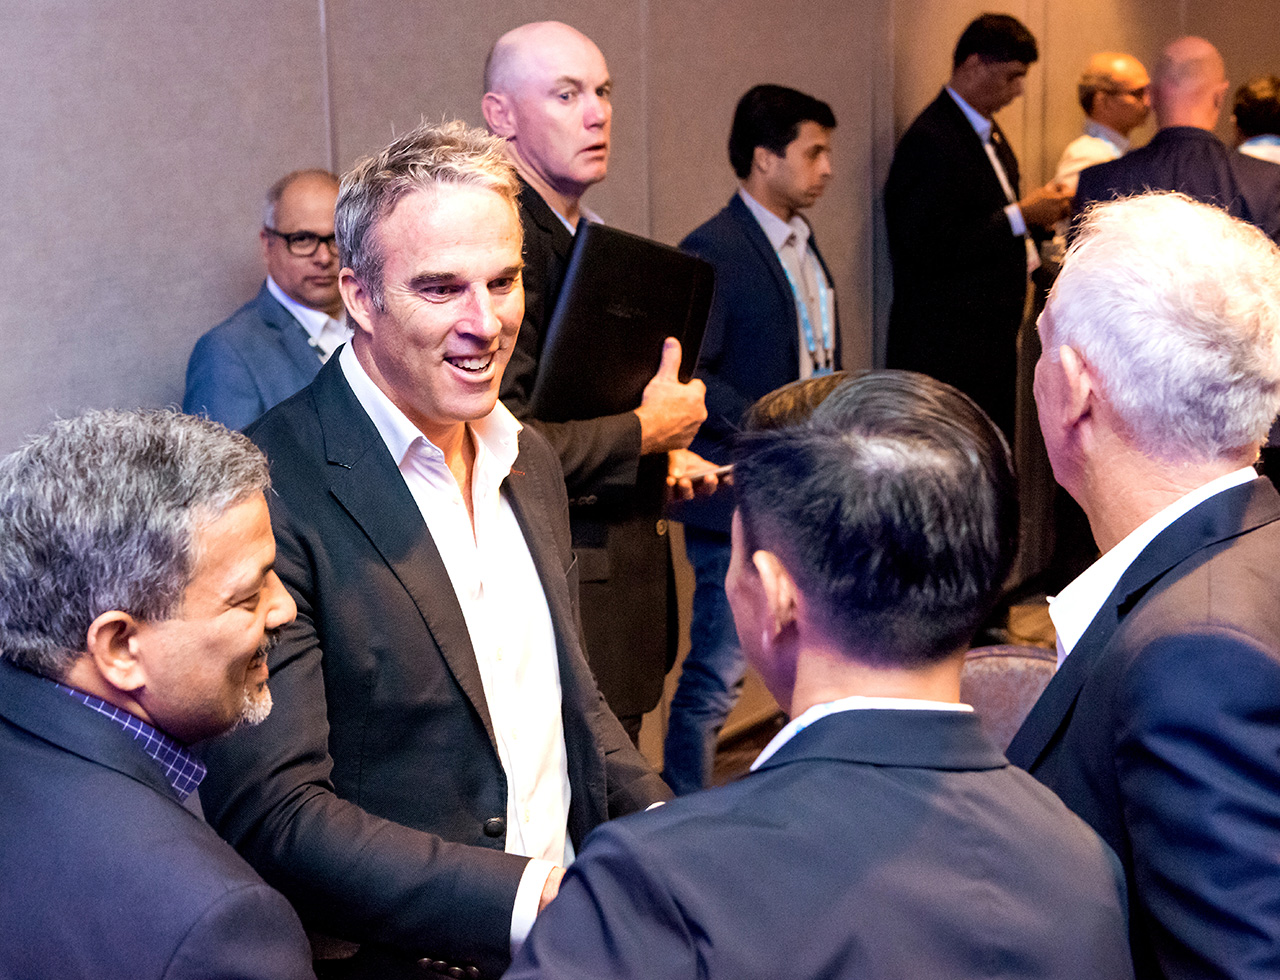 Group of business associates at a networking event